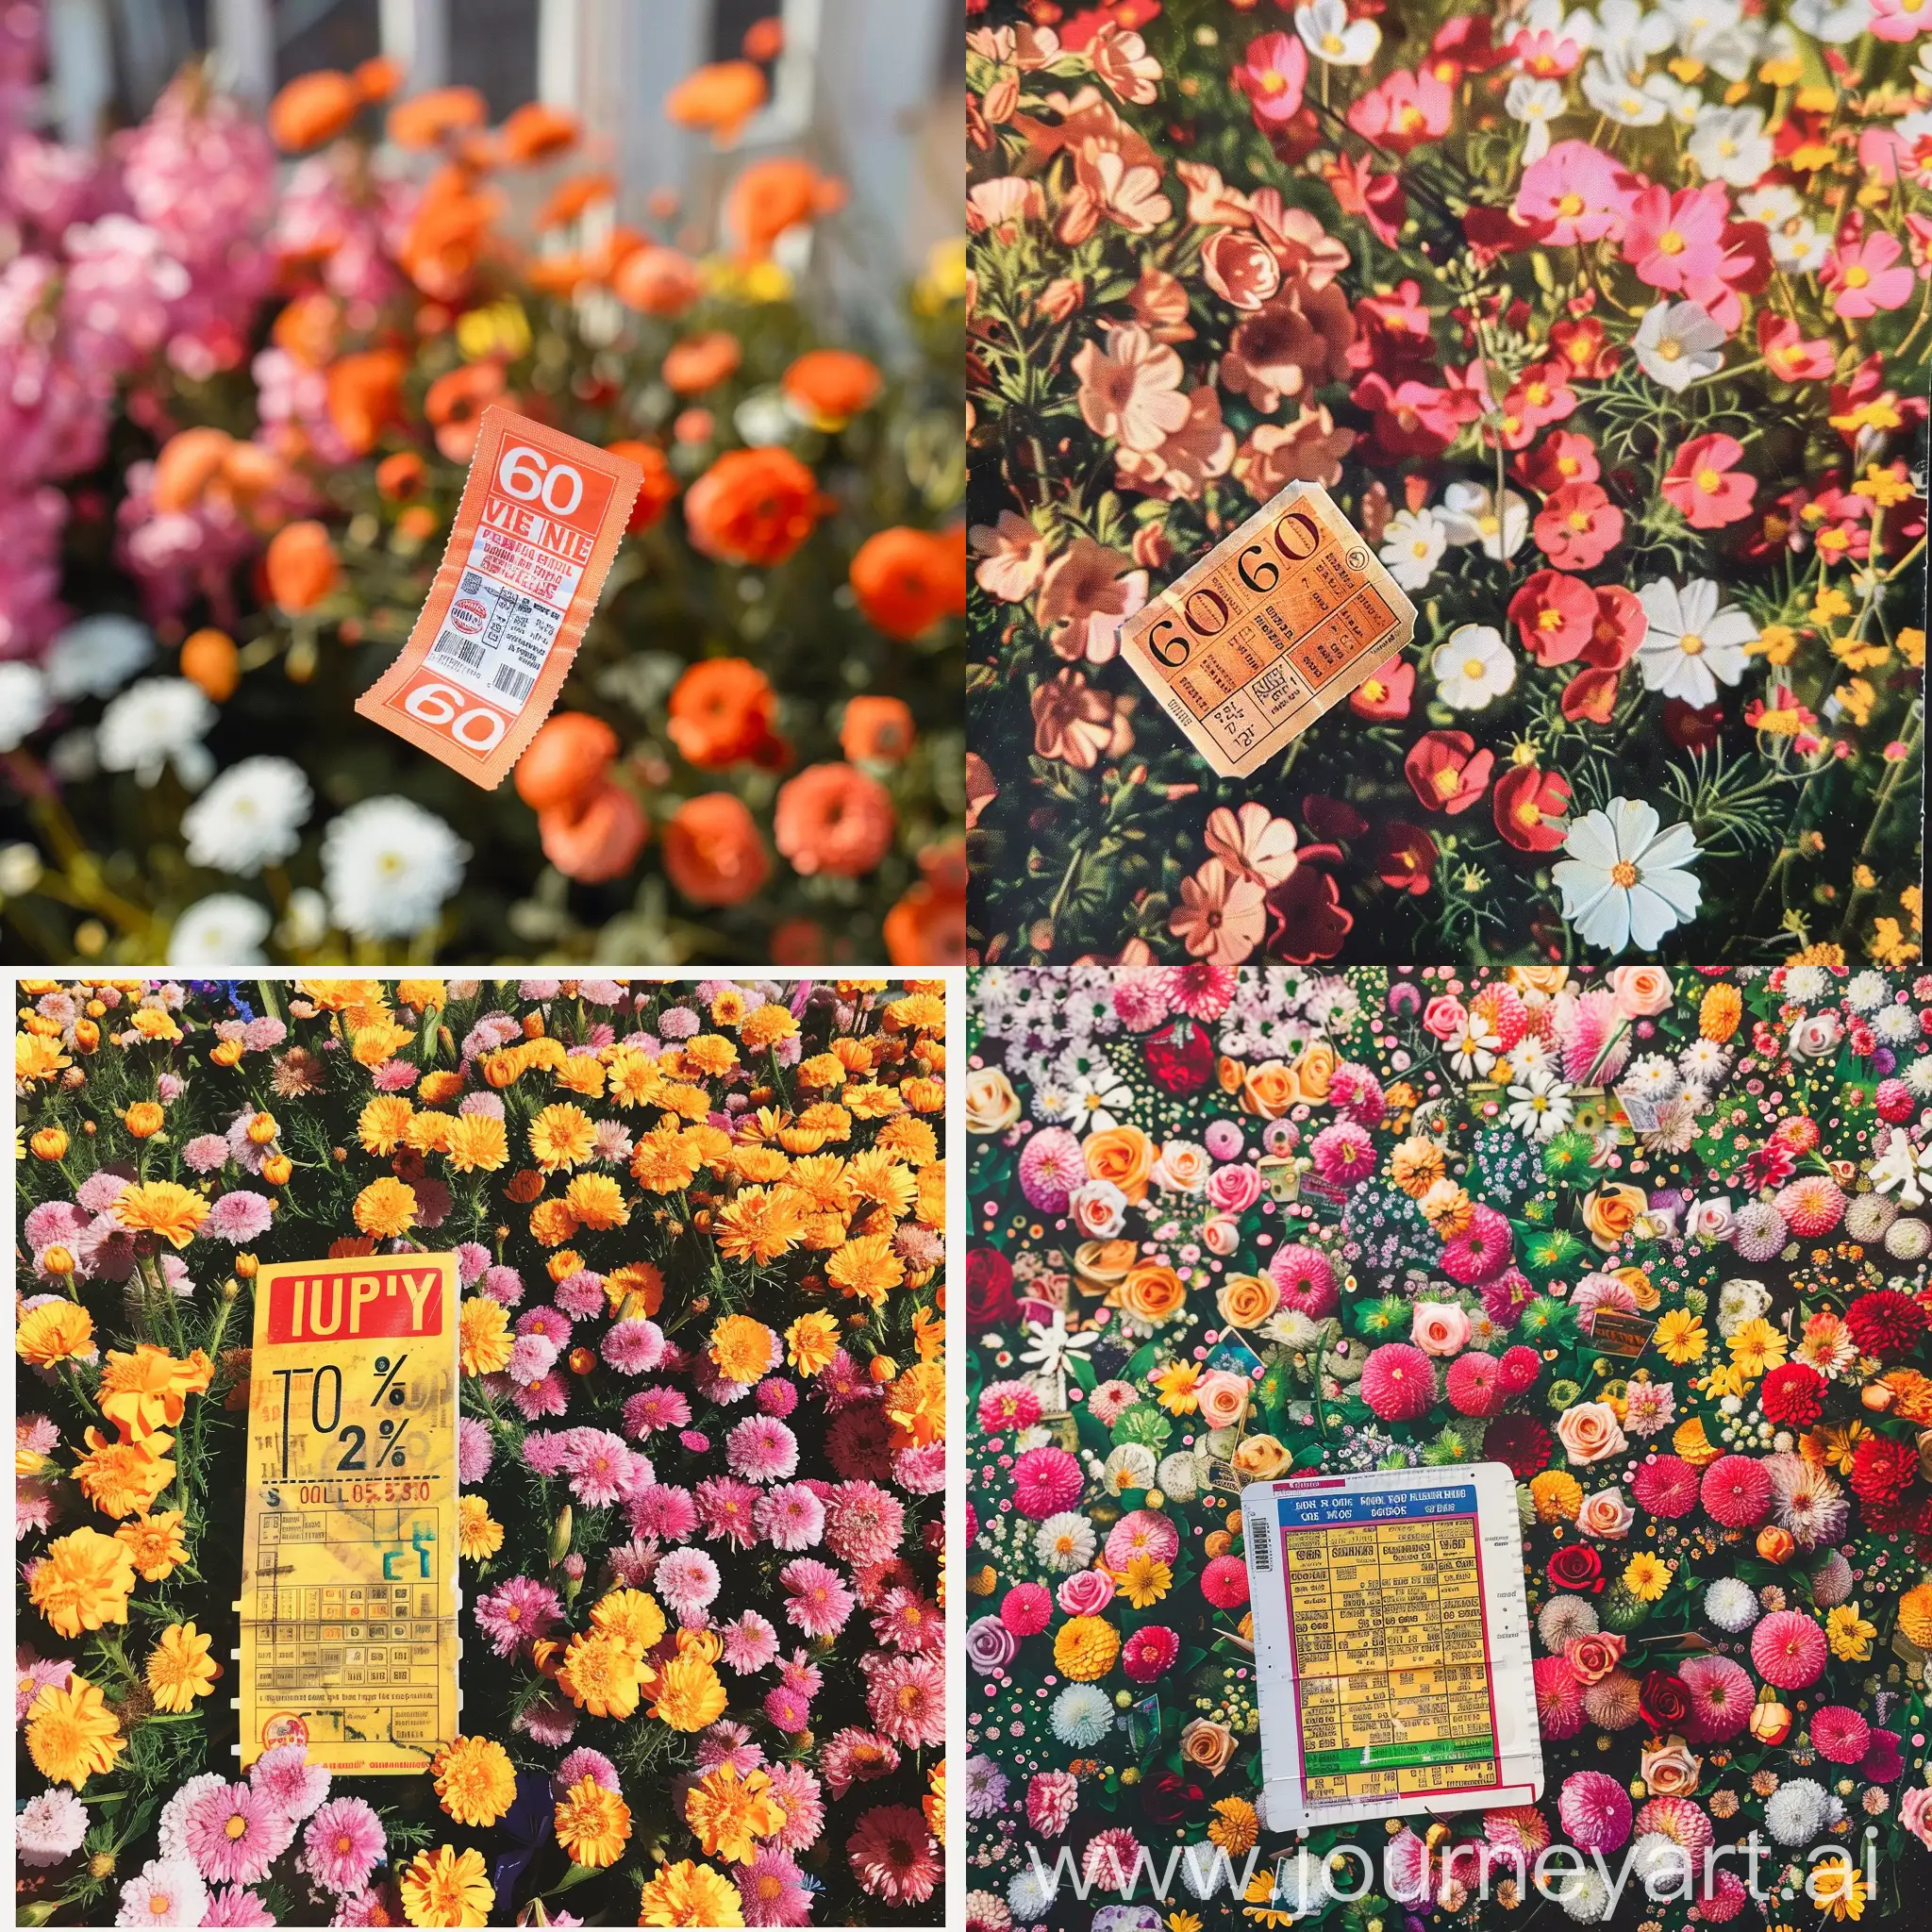 a lucky lottery ticket that took up 60 percent of the picture, against a background of street flowers

